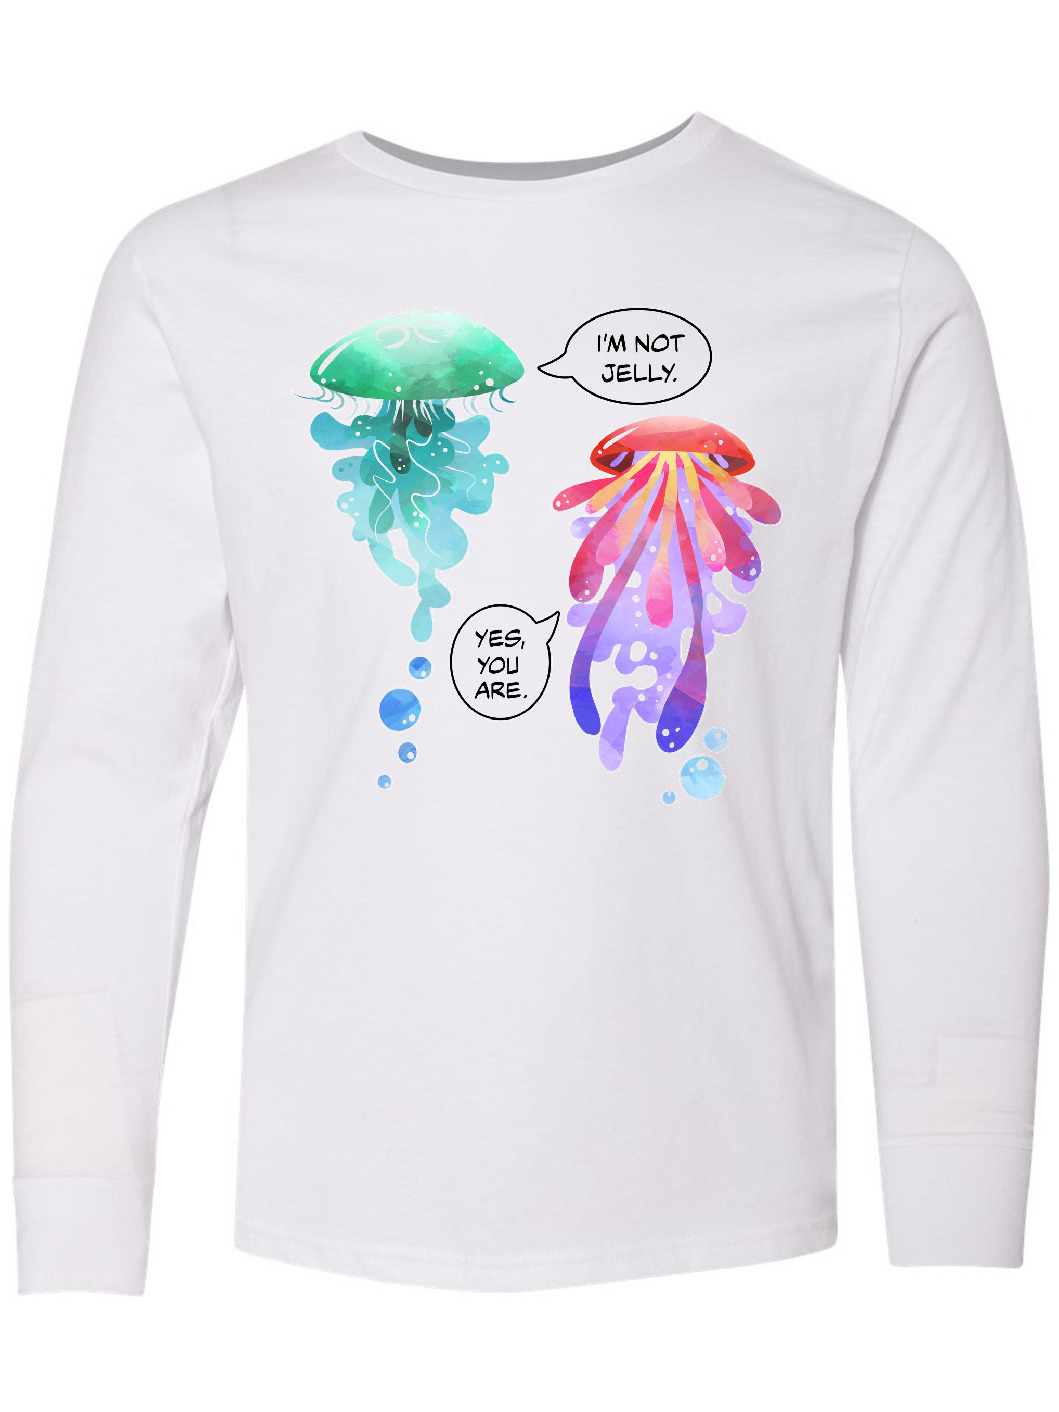 Inktastic Funny I'm Not Jelly Jellyfish in Blue and Pink Long Sleeve Youth T-Shirt - image 1 of 4